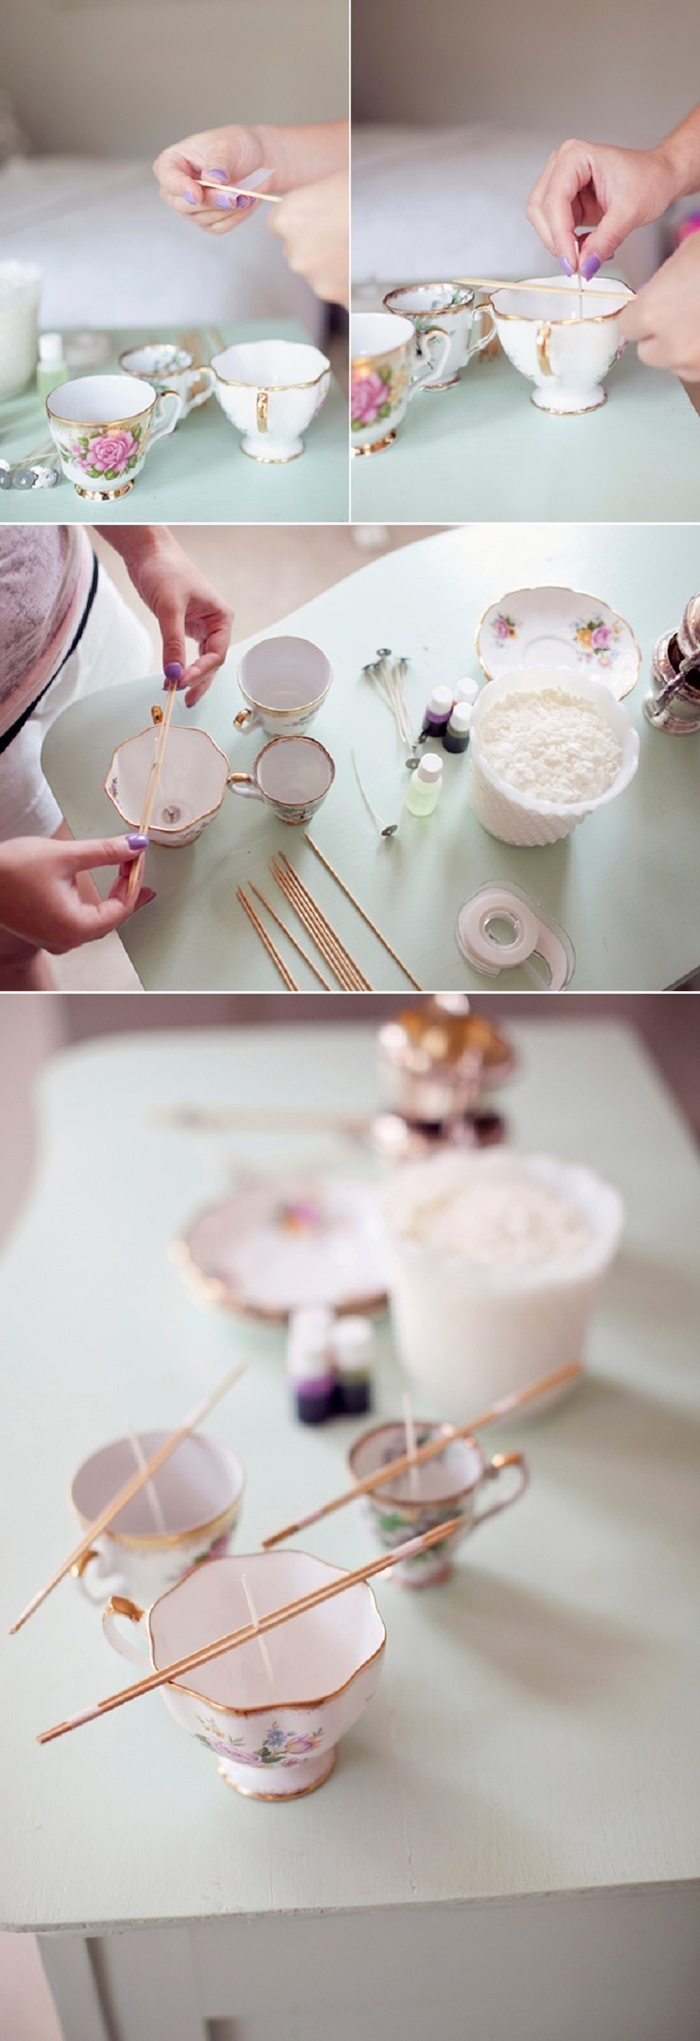 traditional housewarming gifts, vintage teacup candles, diy tutorial, step by step